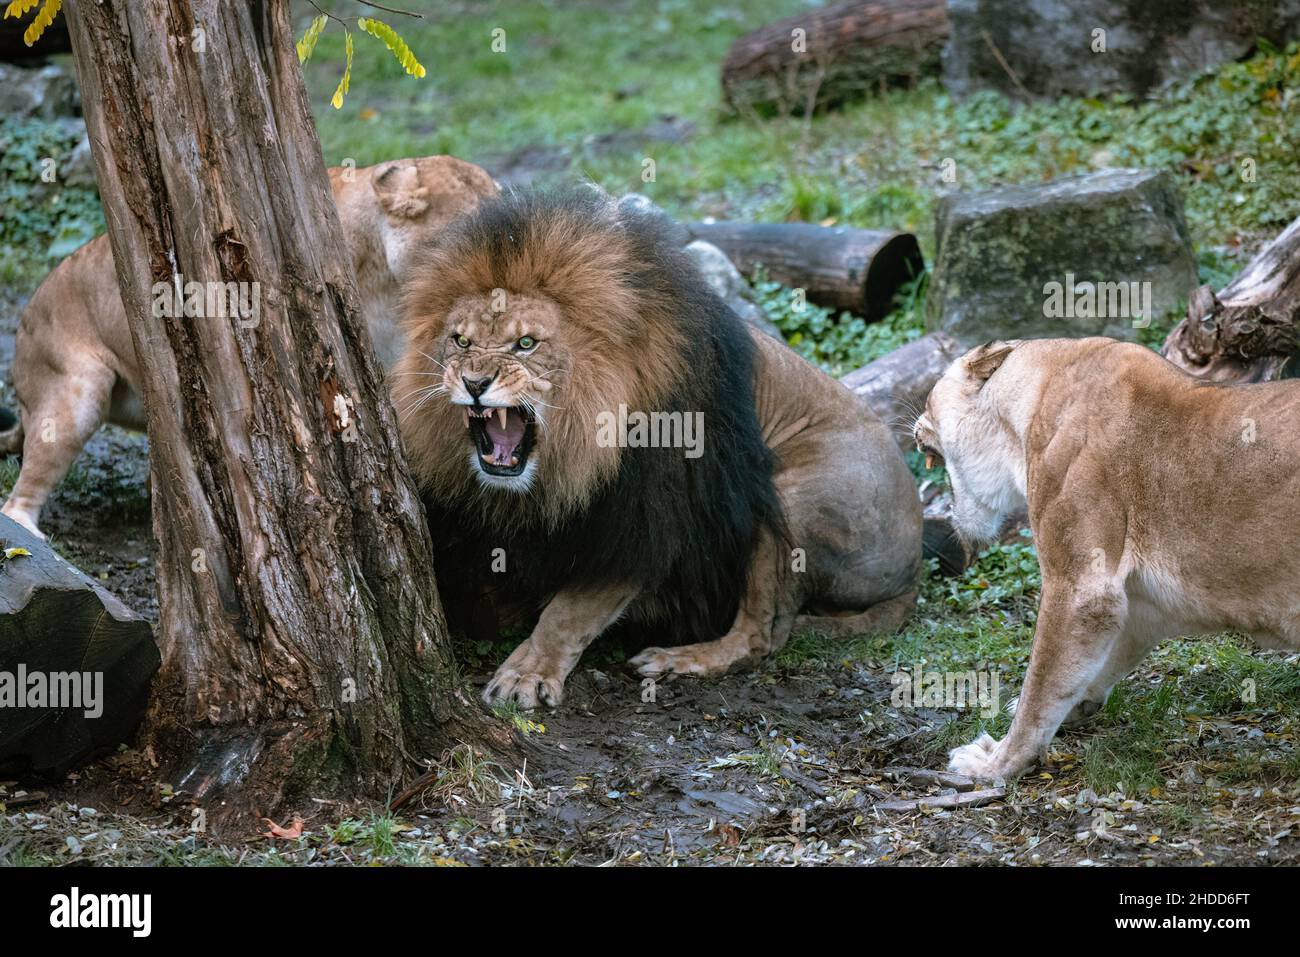 Closeup of a lion sitting next to a tree surrounded by two tigers and roaring furiously Stock Photo